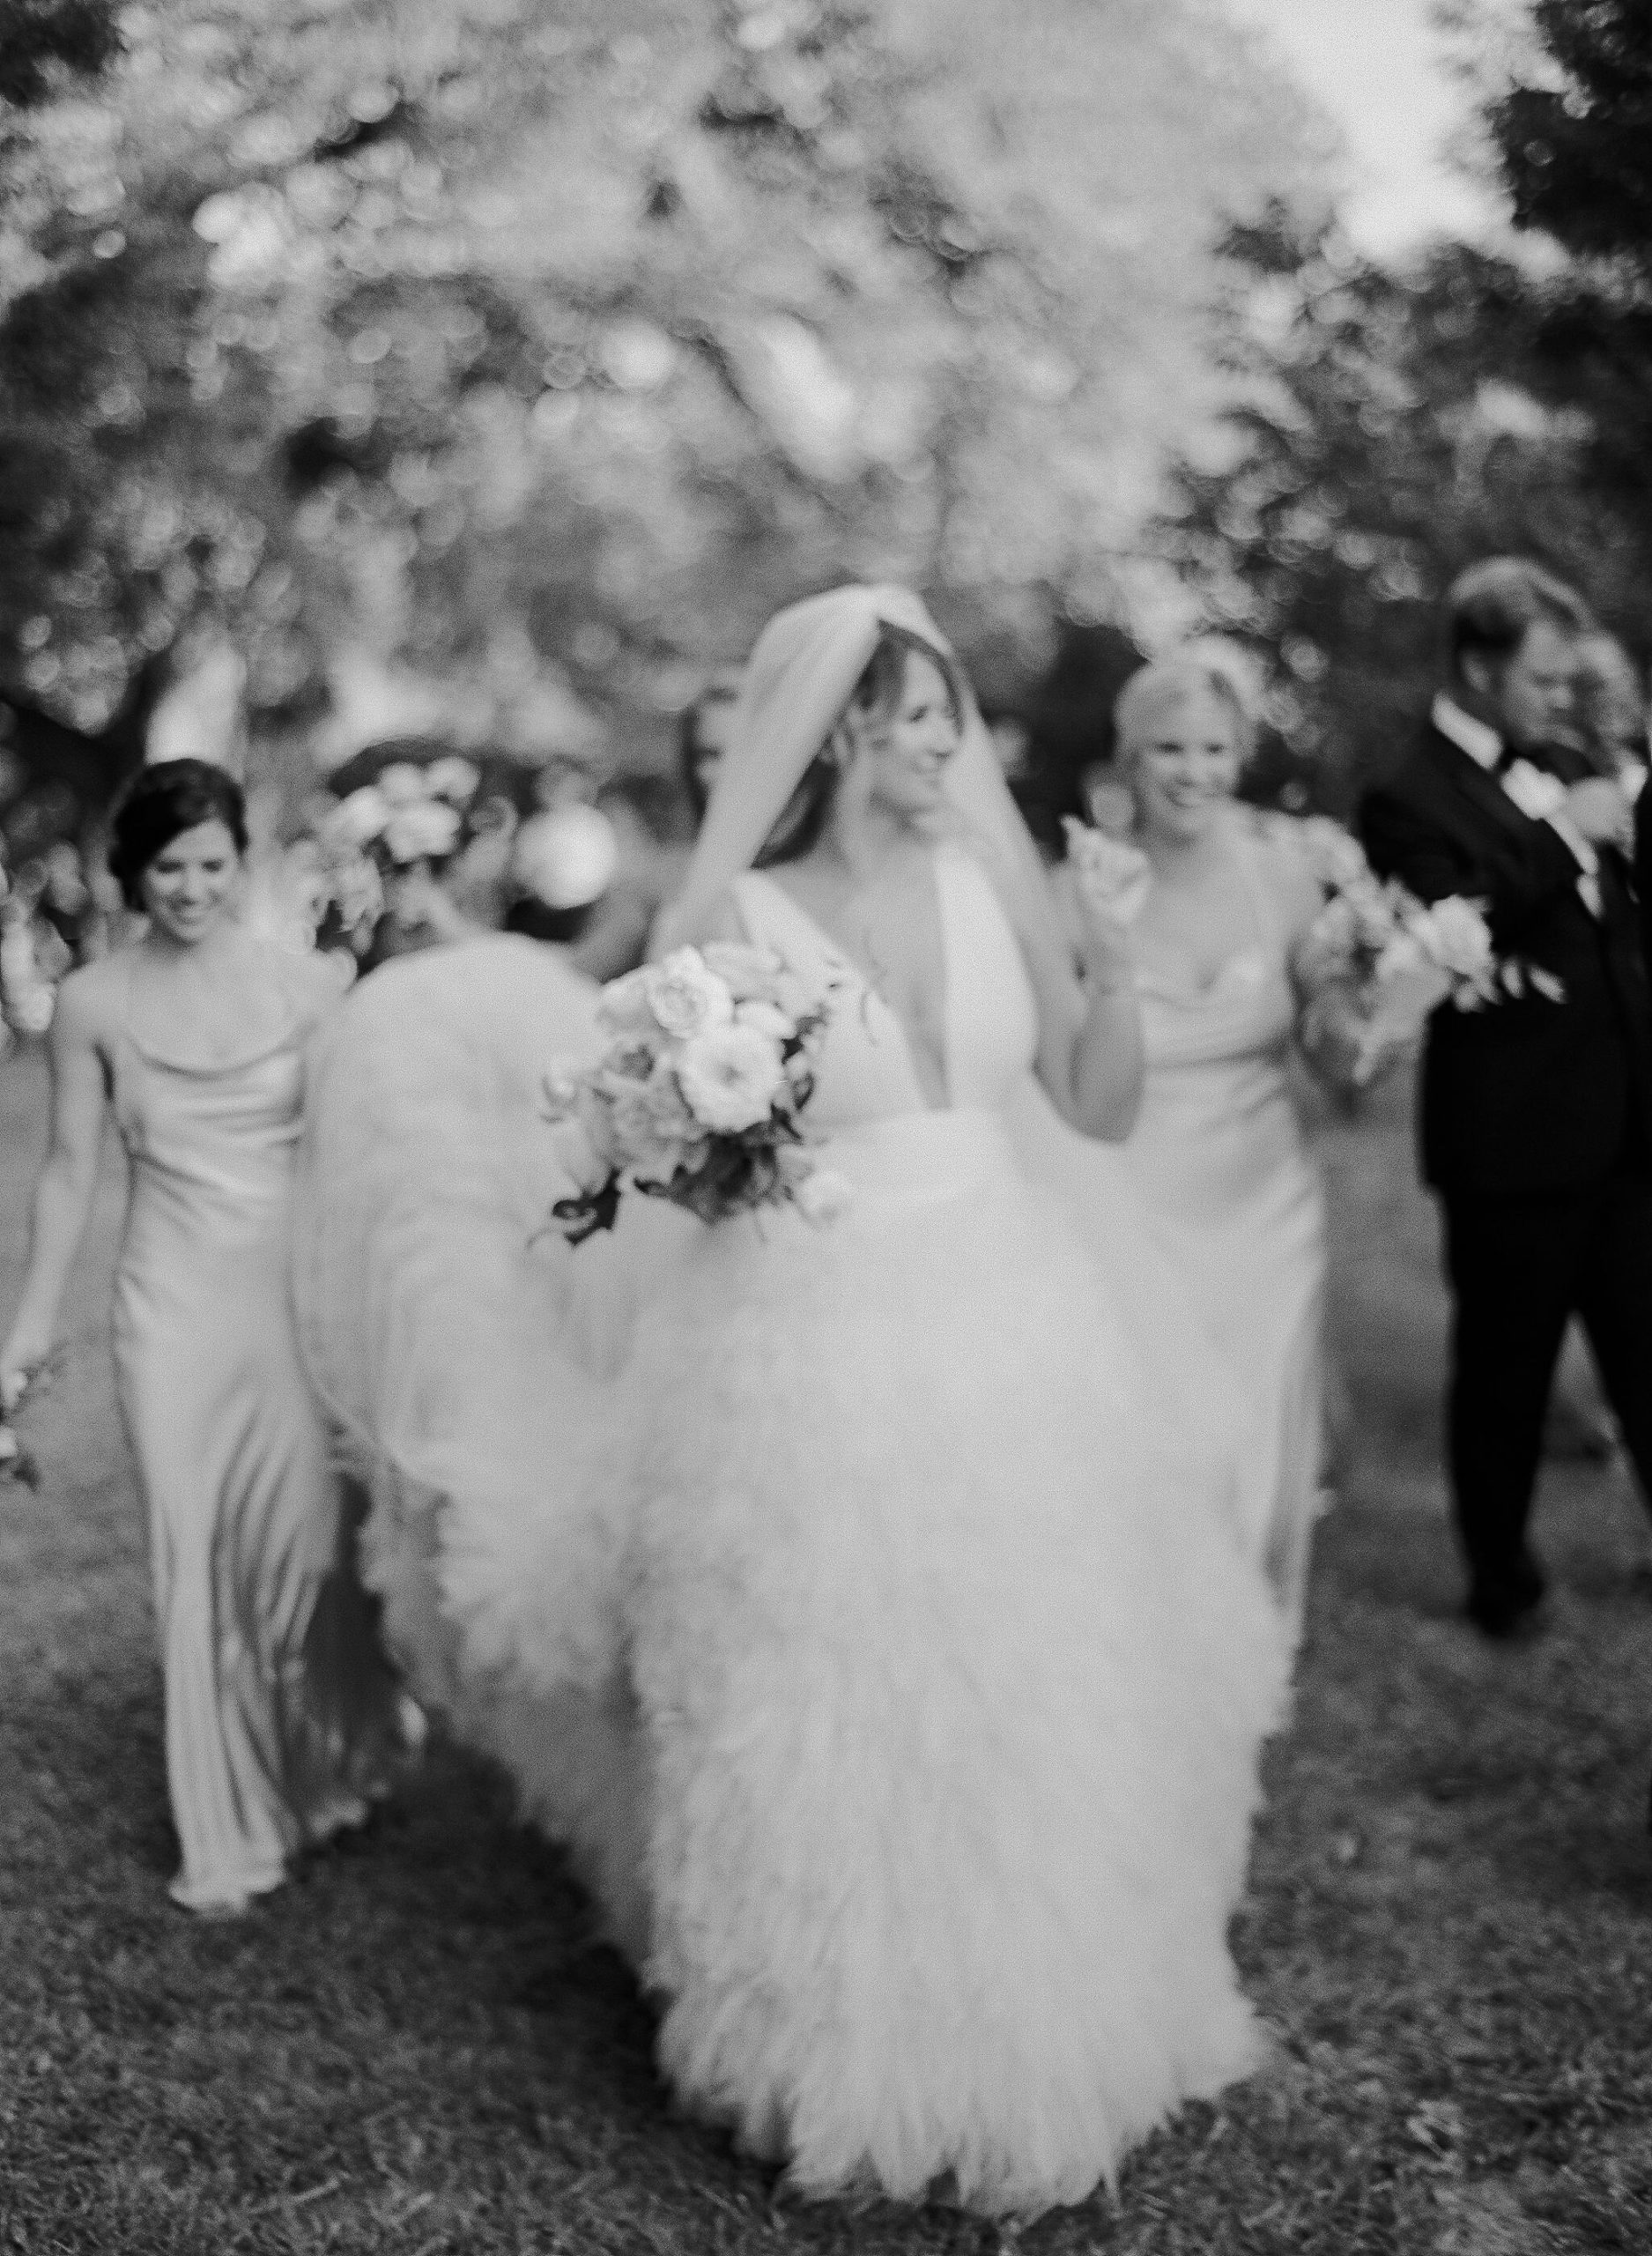 Texas Private Estate Wedding During Covid BW Theory Matthew Moore Photography 24.jpg